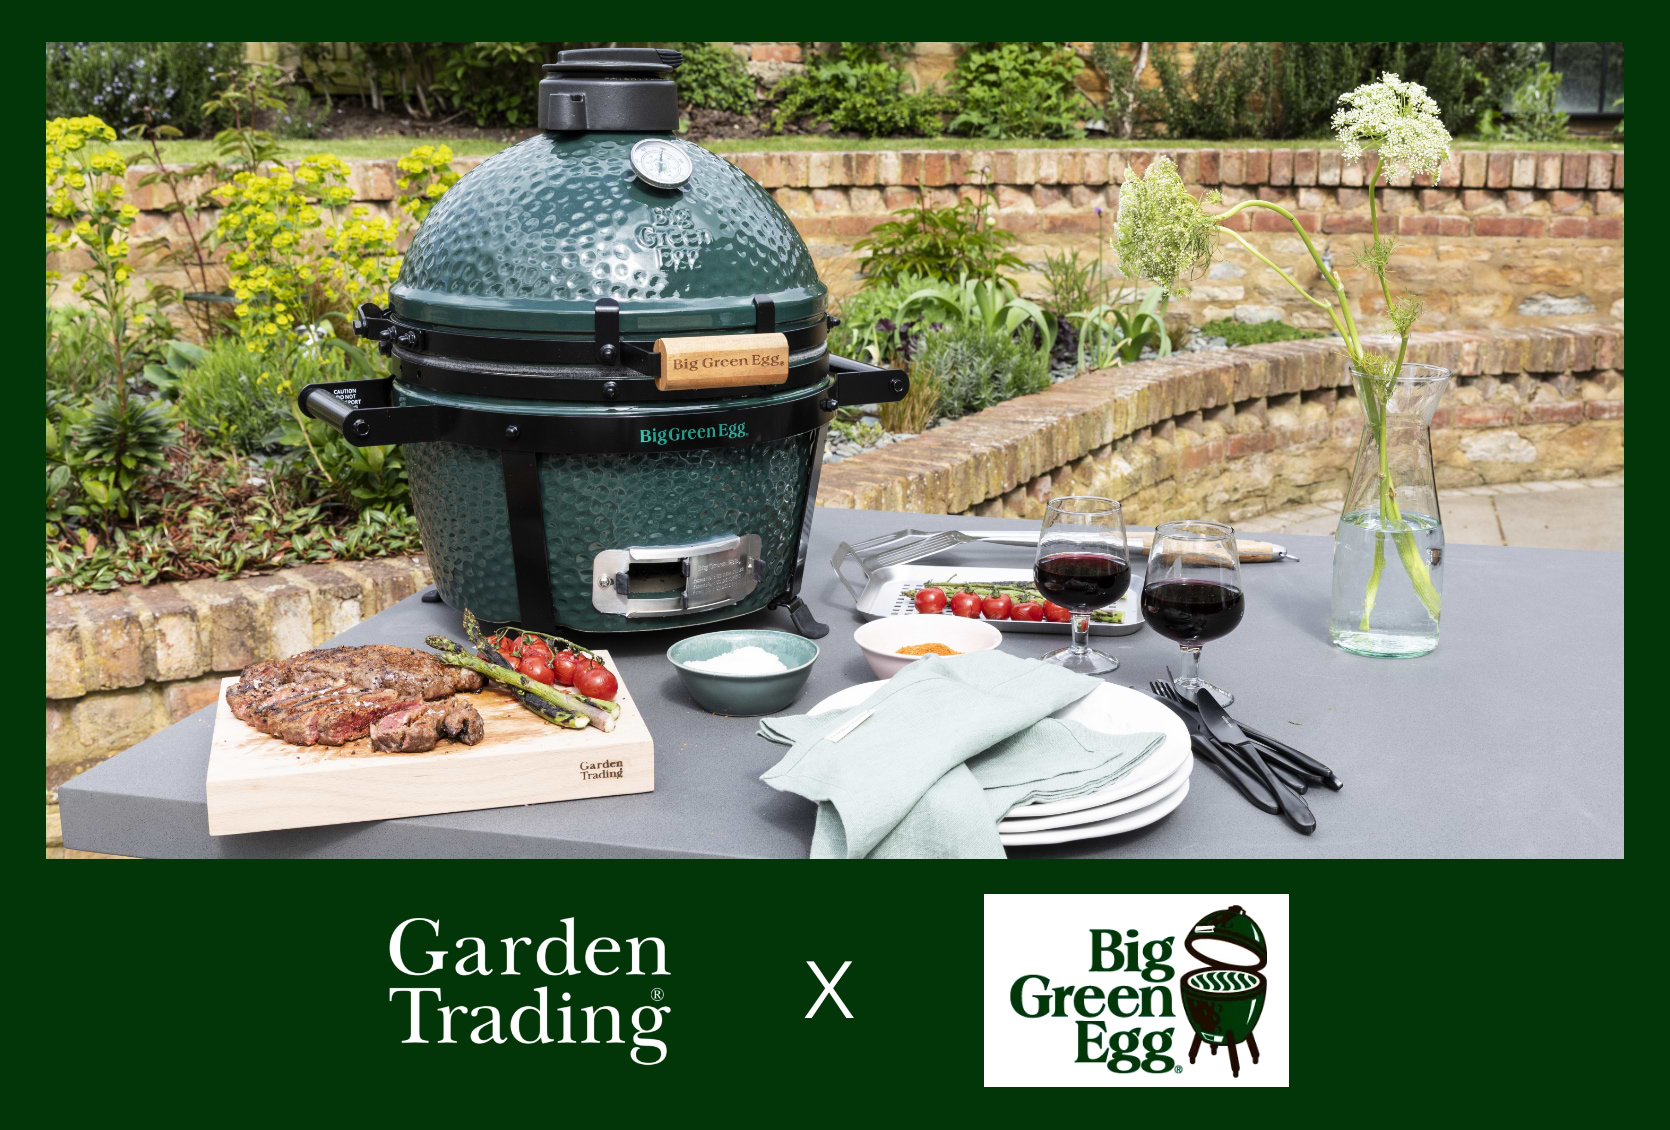 Big Green Egg MiniMax sitting on Garden Trading's Chilford Dining Table in a walled patio area, surrounded by Steak, Asparagus and Vine Tomatoes, plus grilling accessories